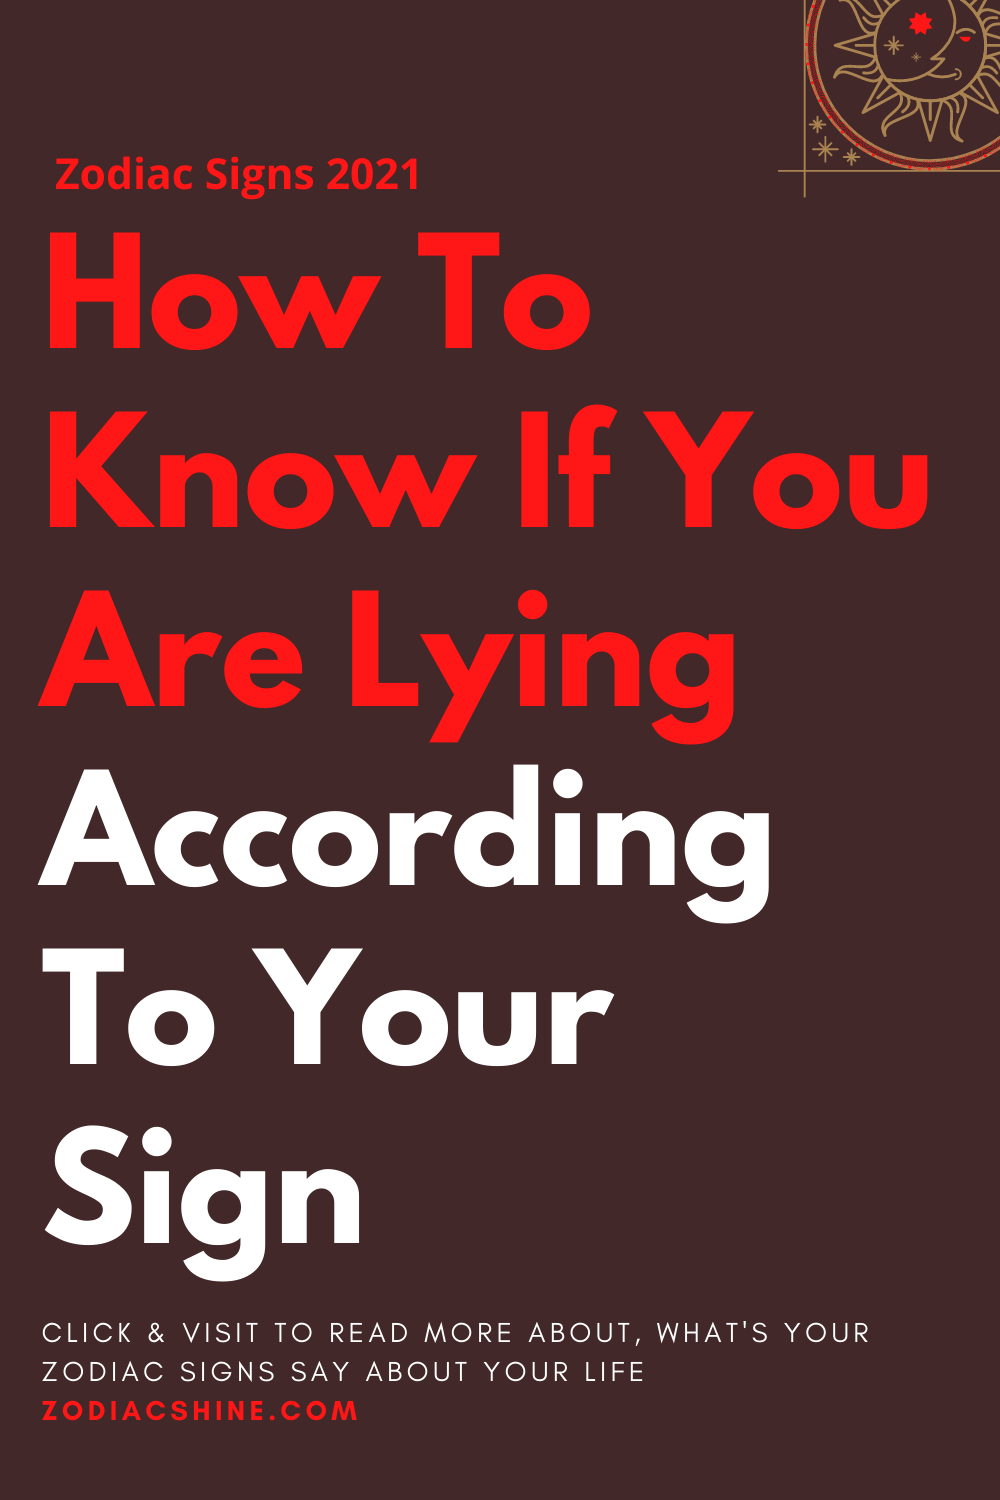 How To Know If You Are Lying According To Your Sign